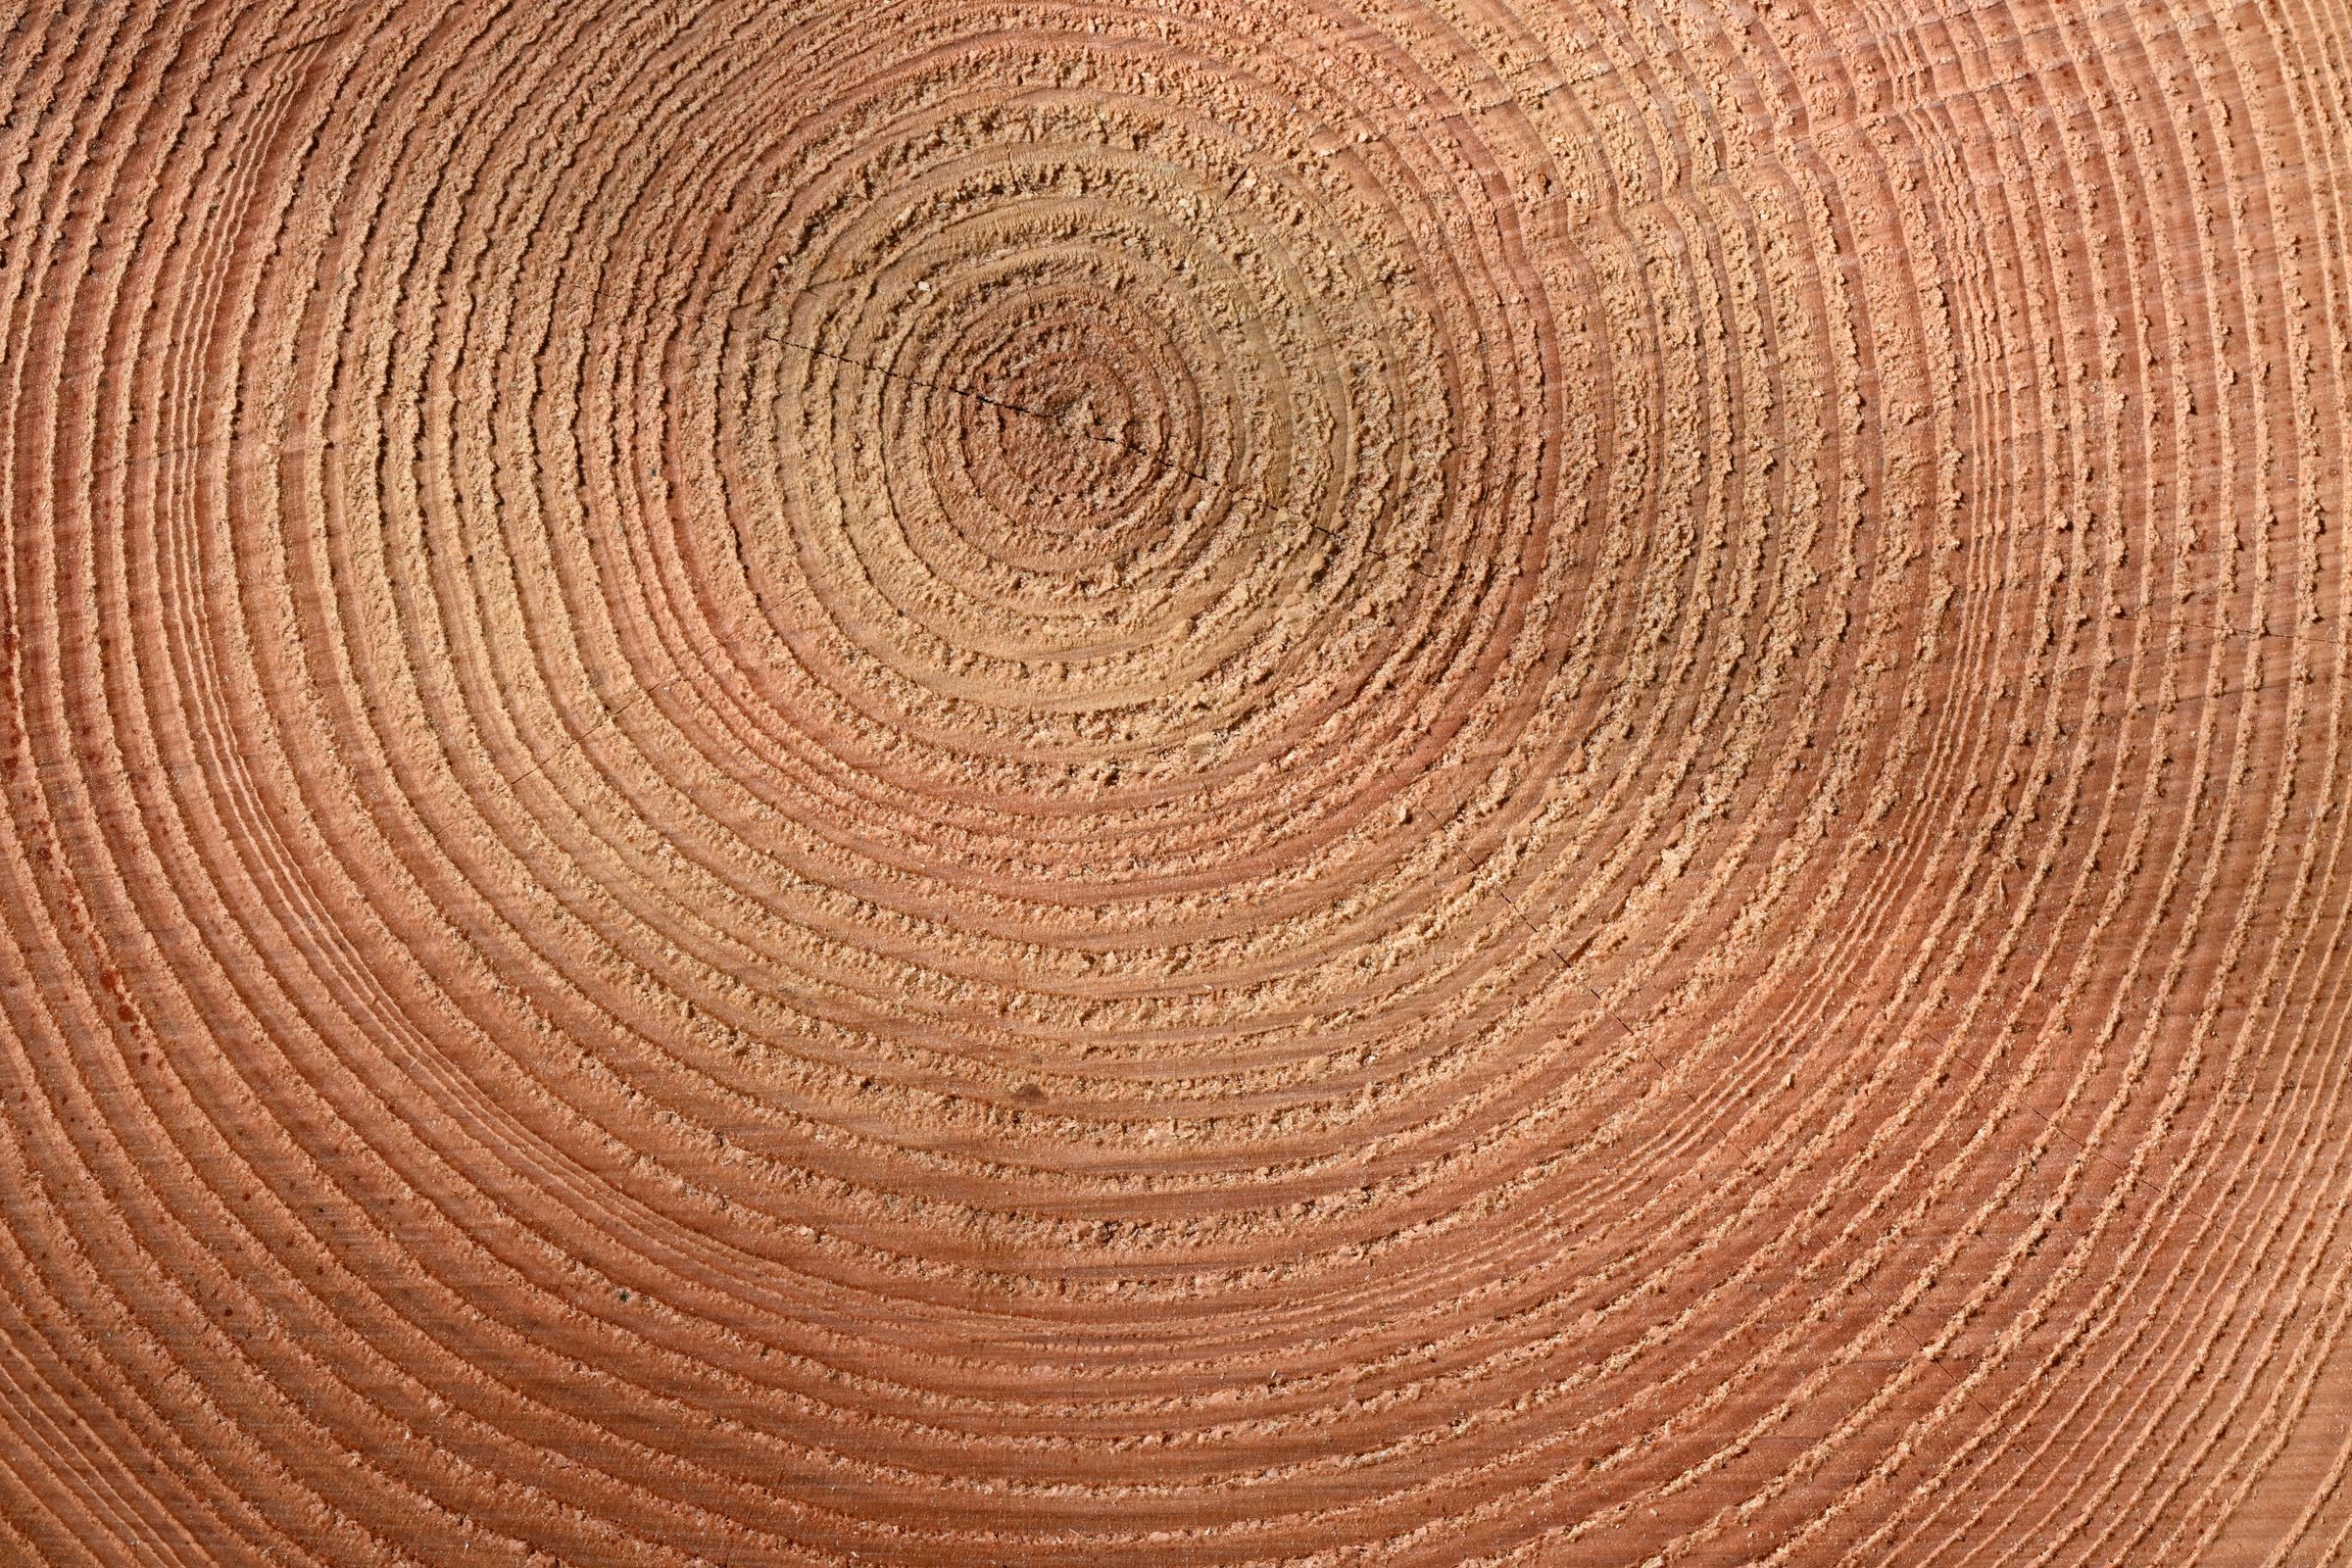 The cross section of a tree trunk shows a pattern of light and dark rings of wood.